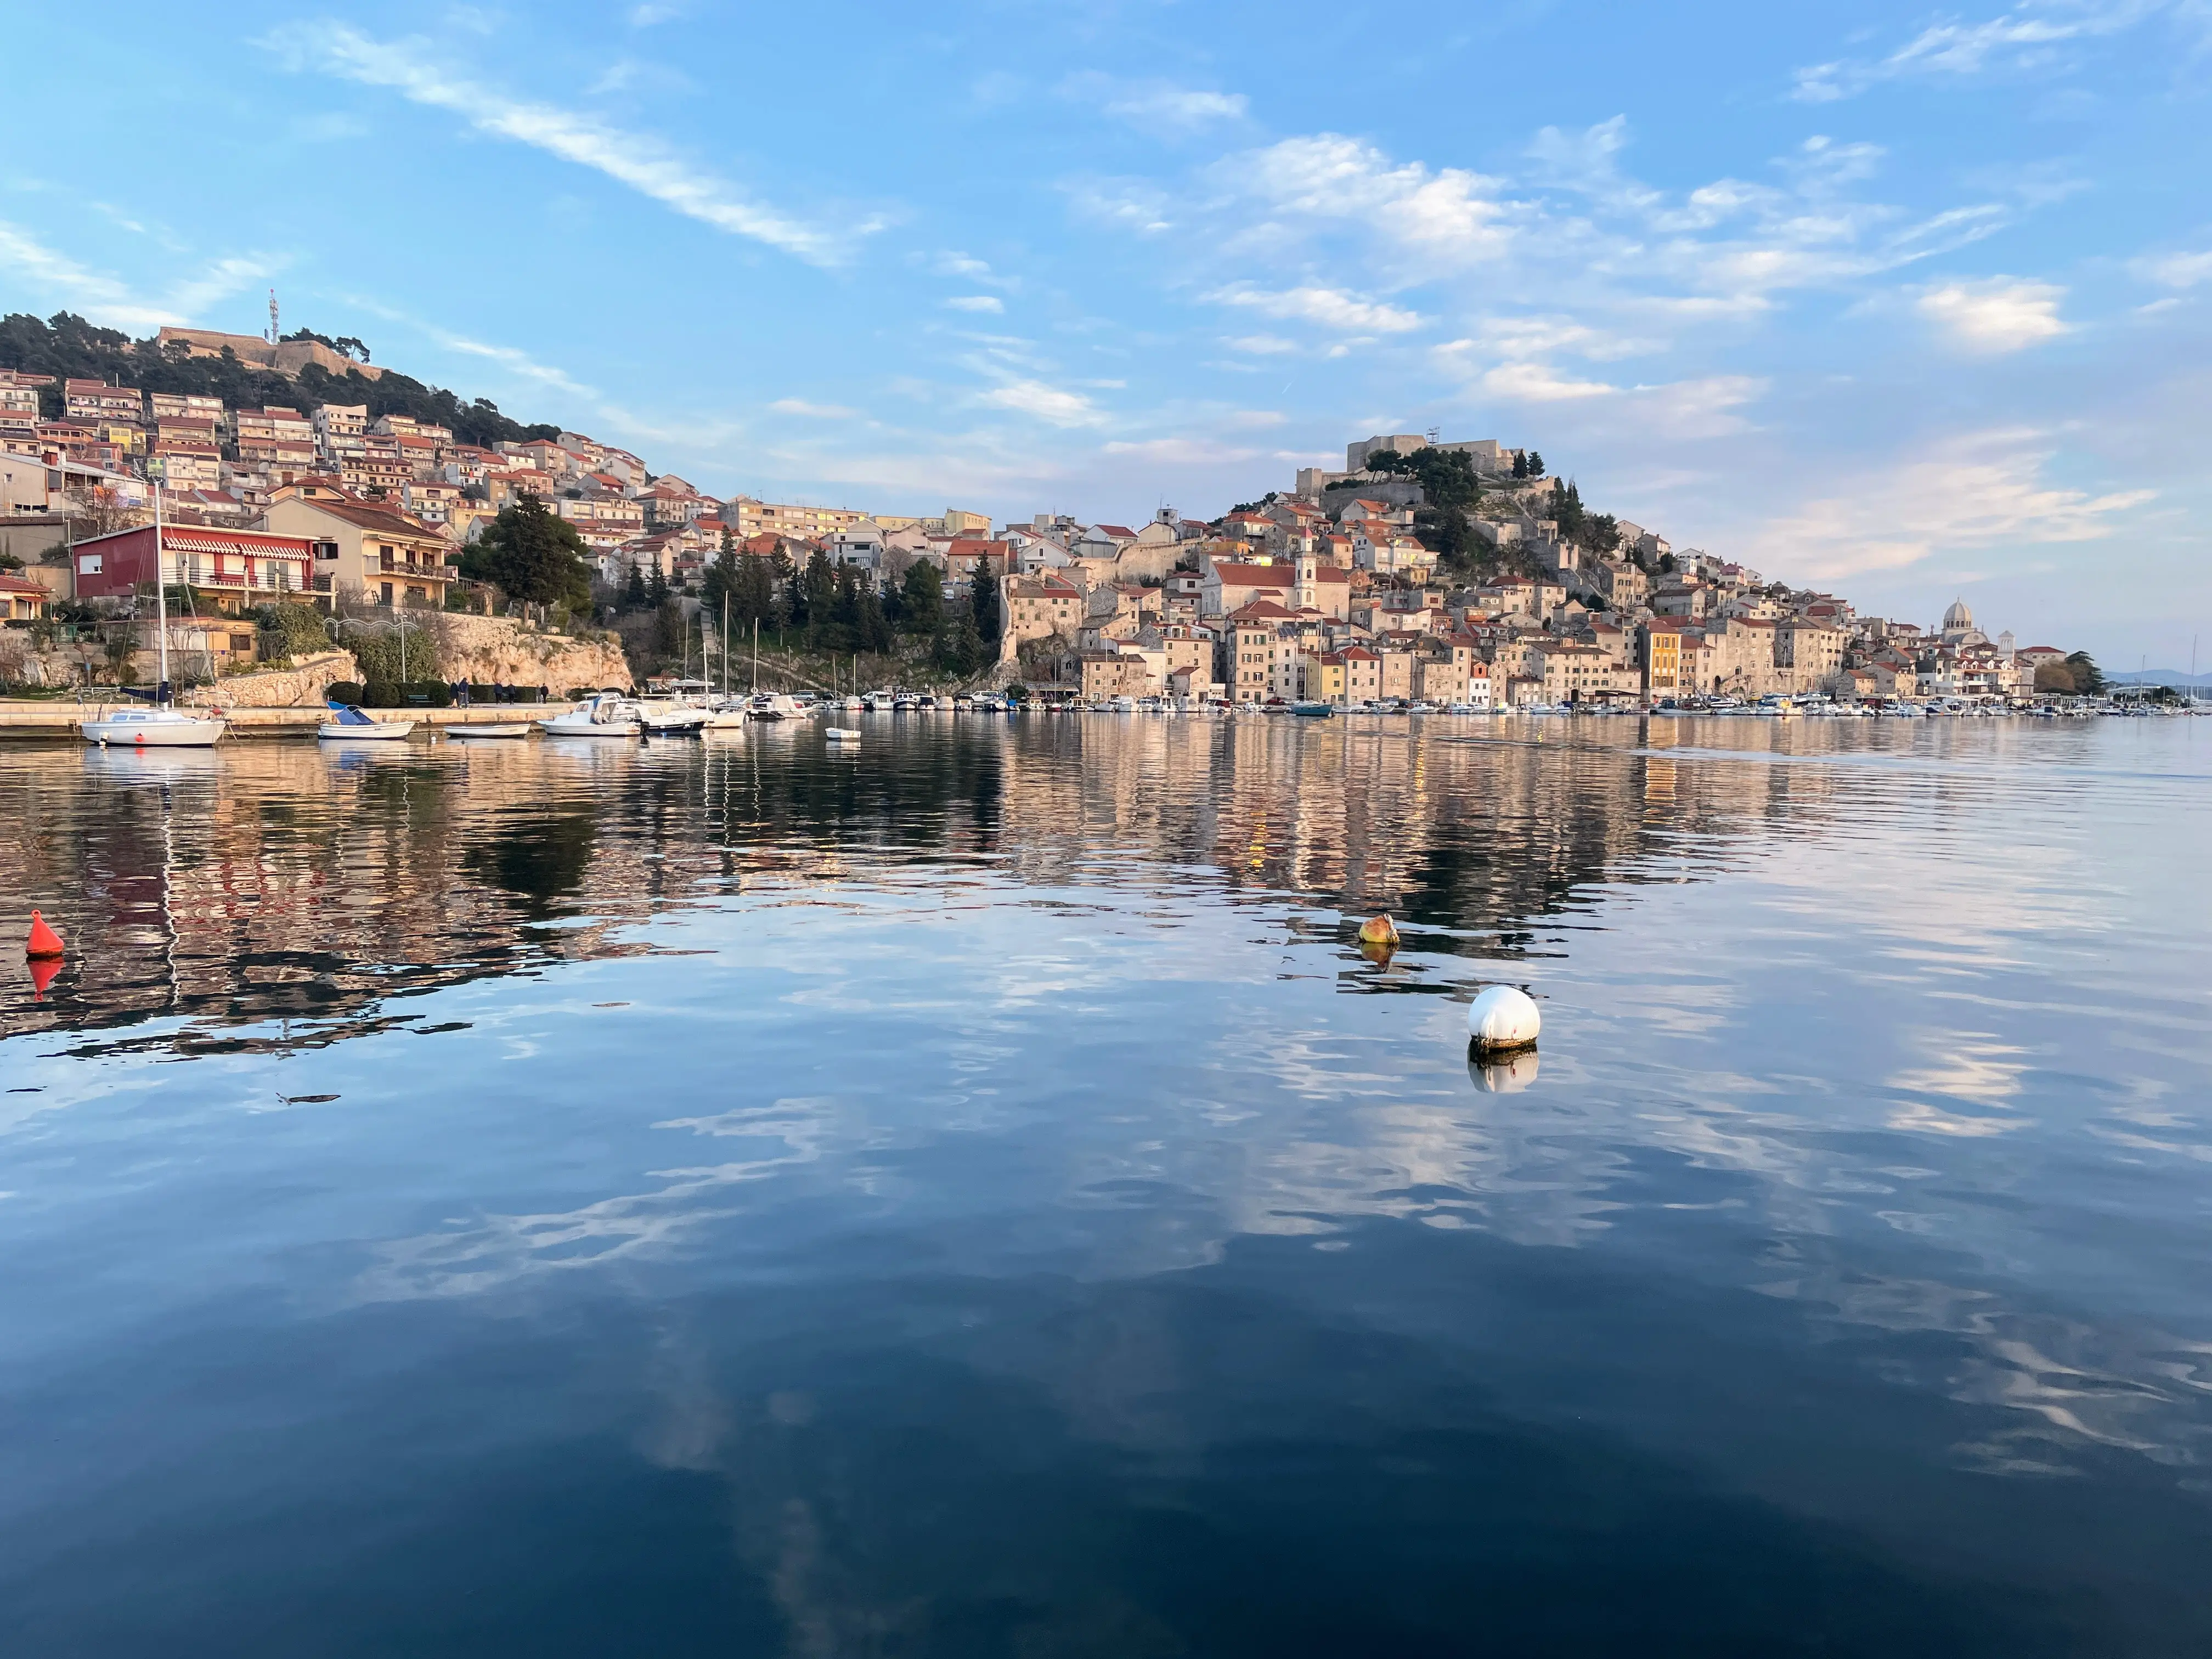 Tranquil harbor with moored boats reflecting in the water at dusk, with a view of the terraced houses of a charming town Šibenik